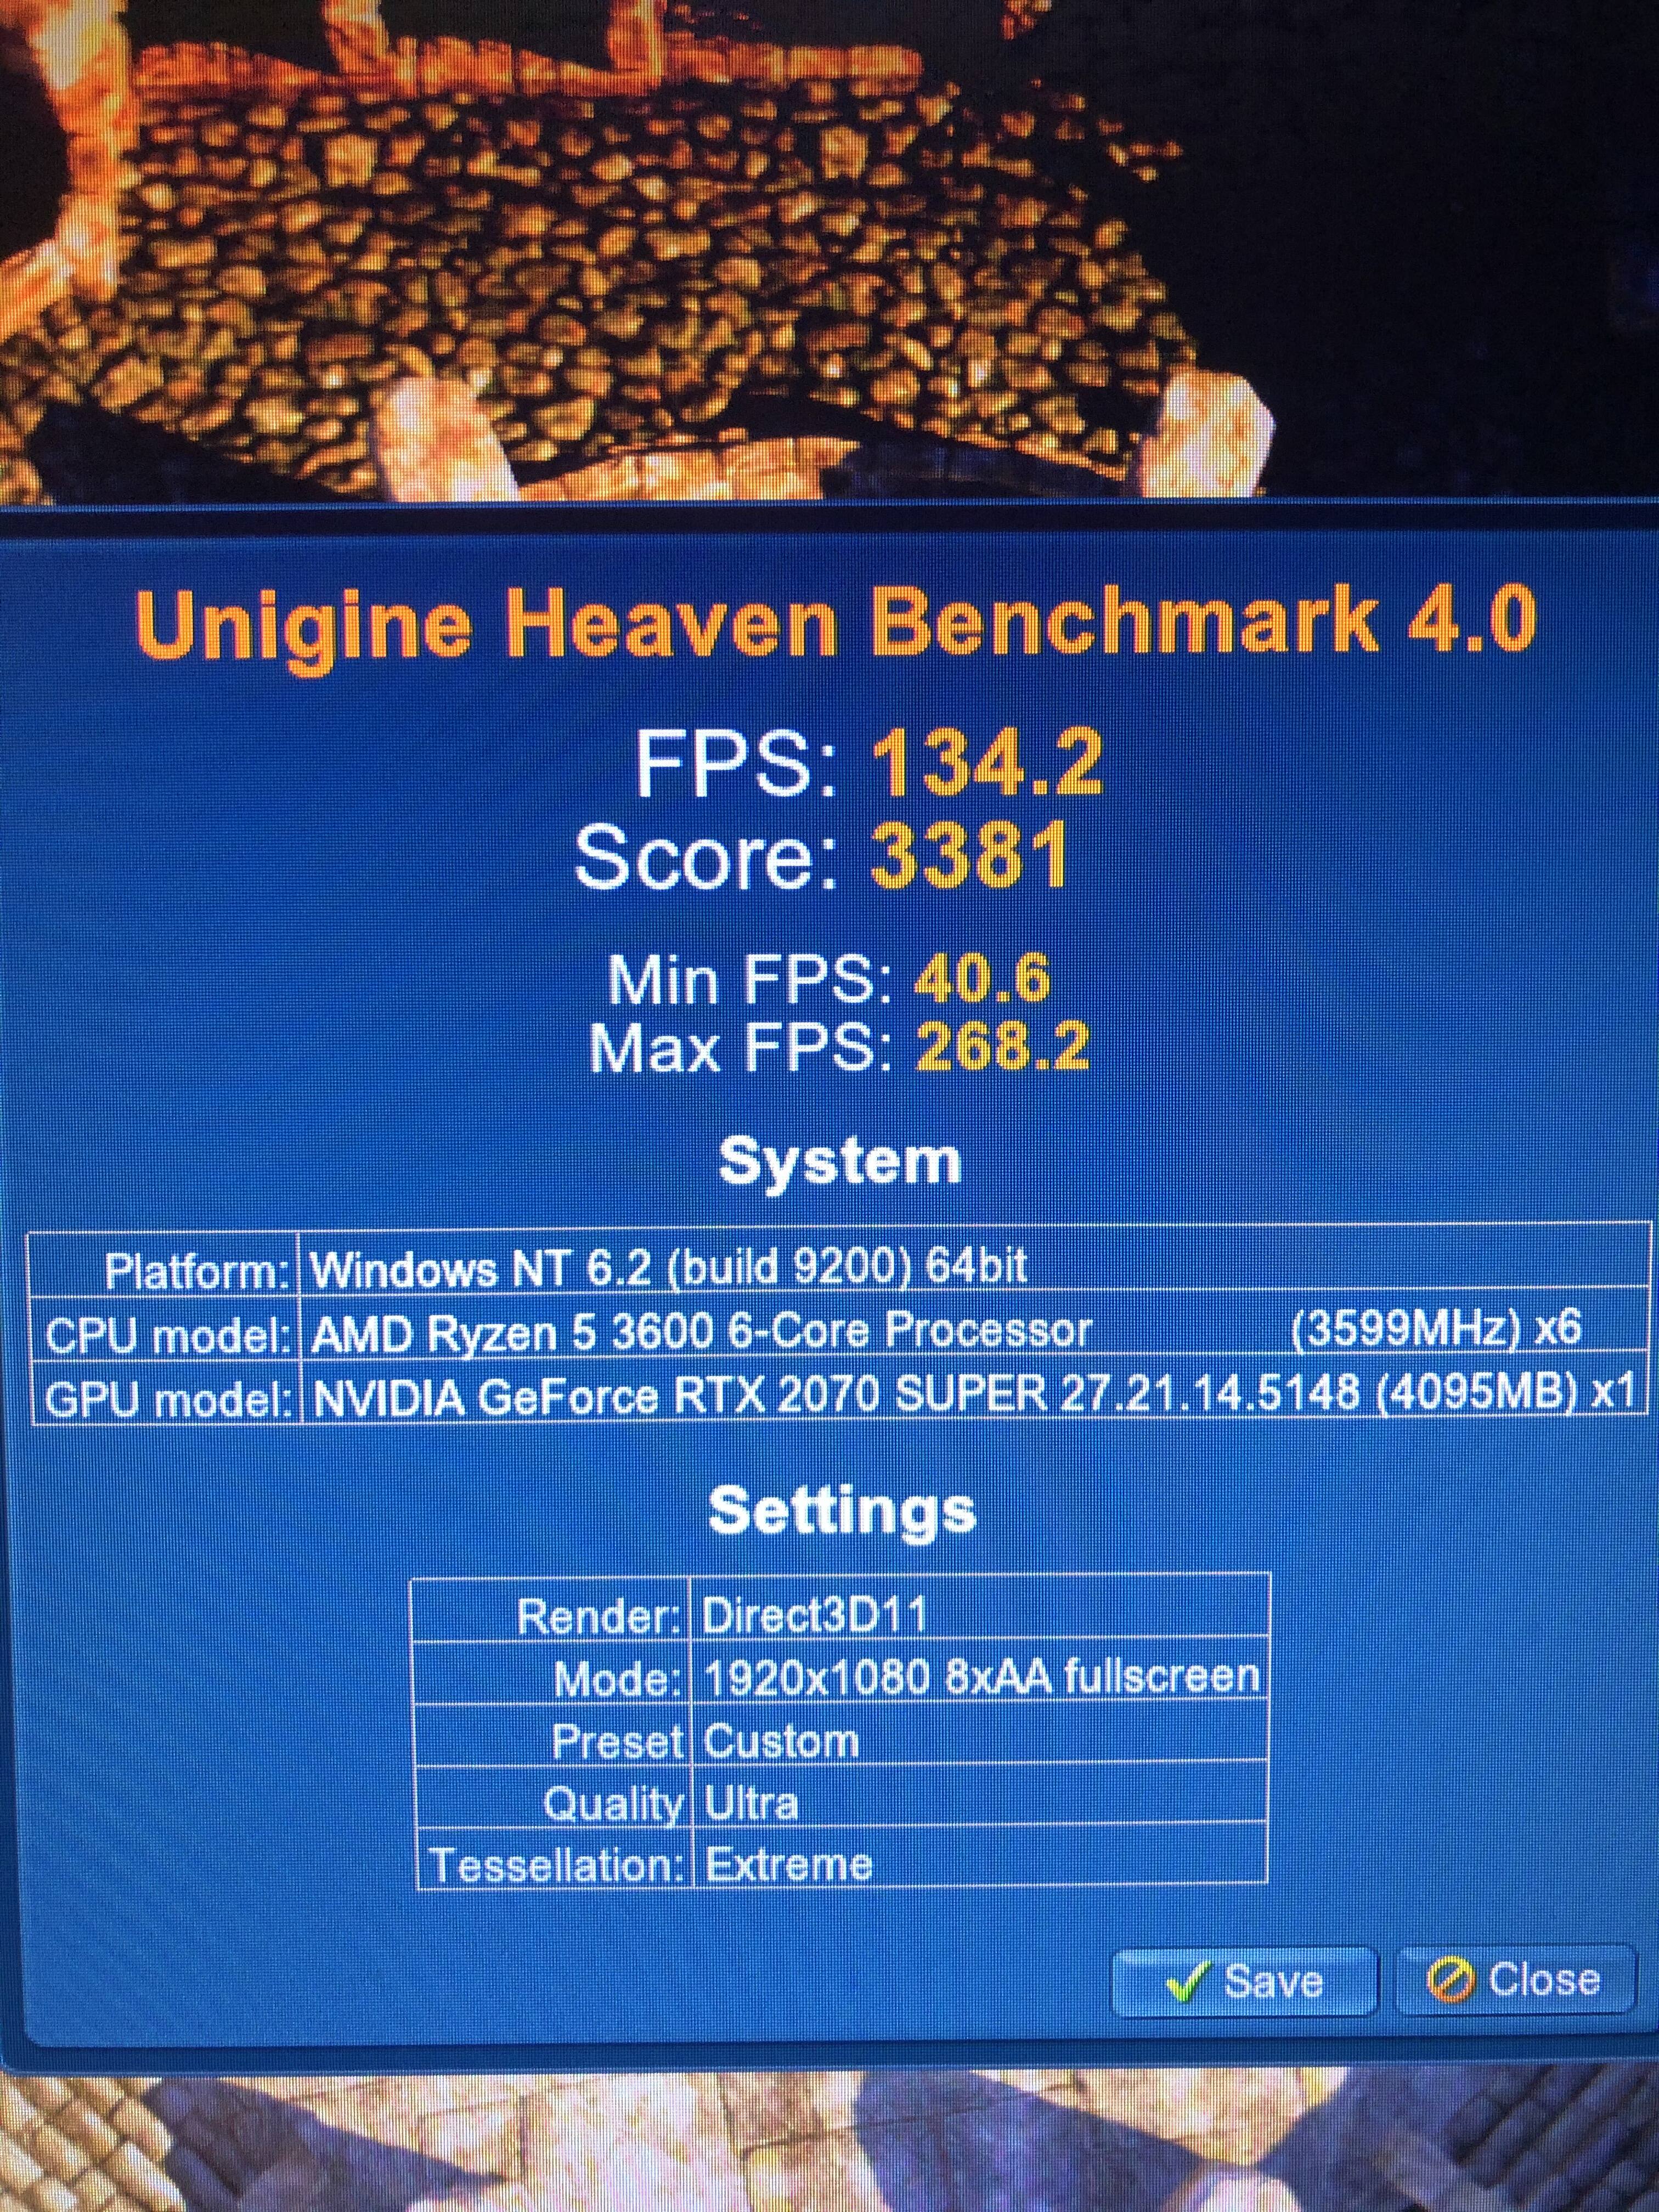 Afstudeeralbum sarcoom Arrangement RTX 2070, I5-9600k(Stock) Bad Score? Temps During The Benchmark Hit About  83* With A Max Fan Curve Of 80% R/pcmasterrace |  colegioclubuniversitario.edu.ar